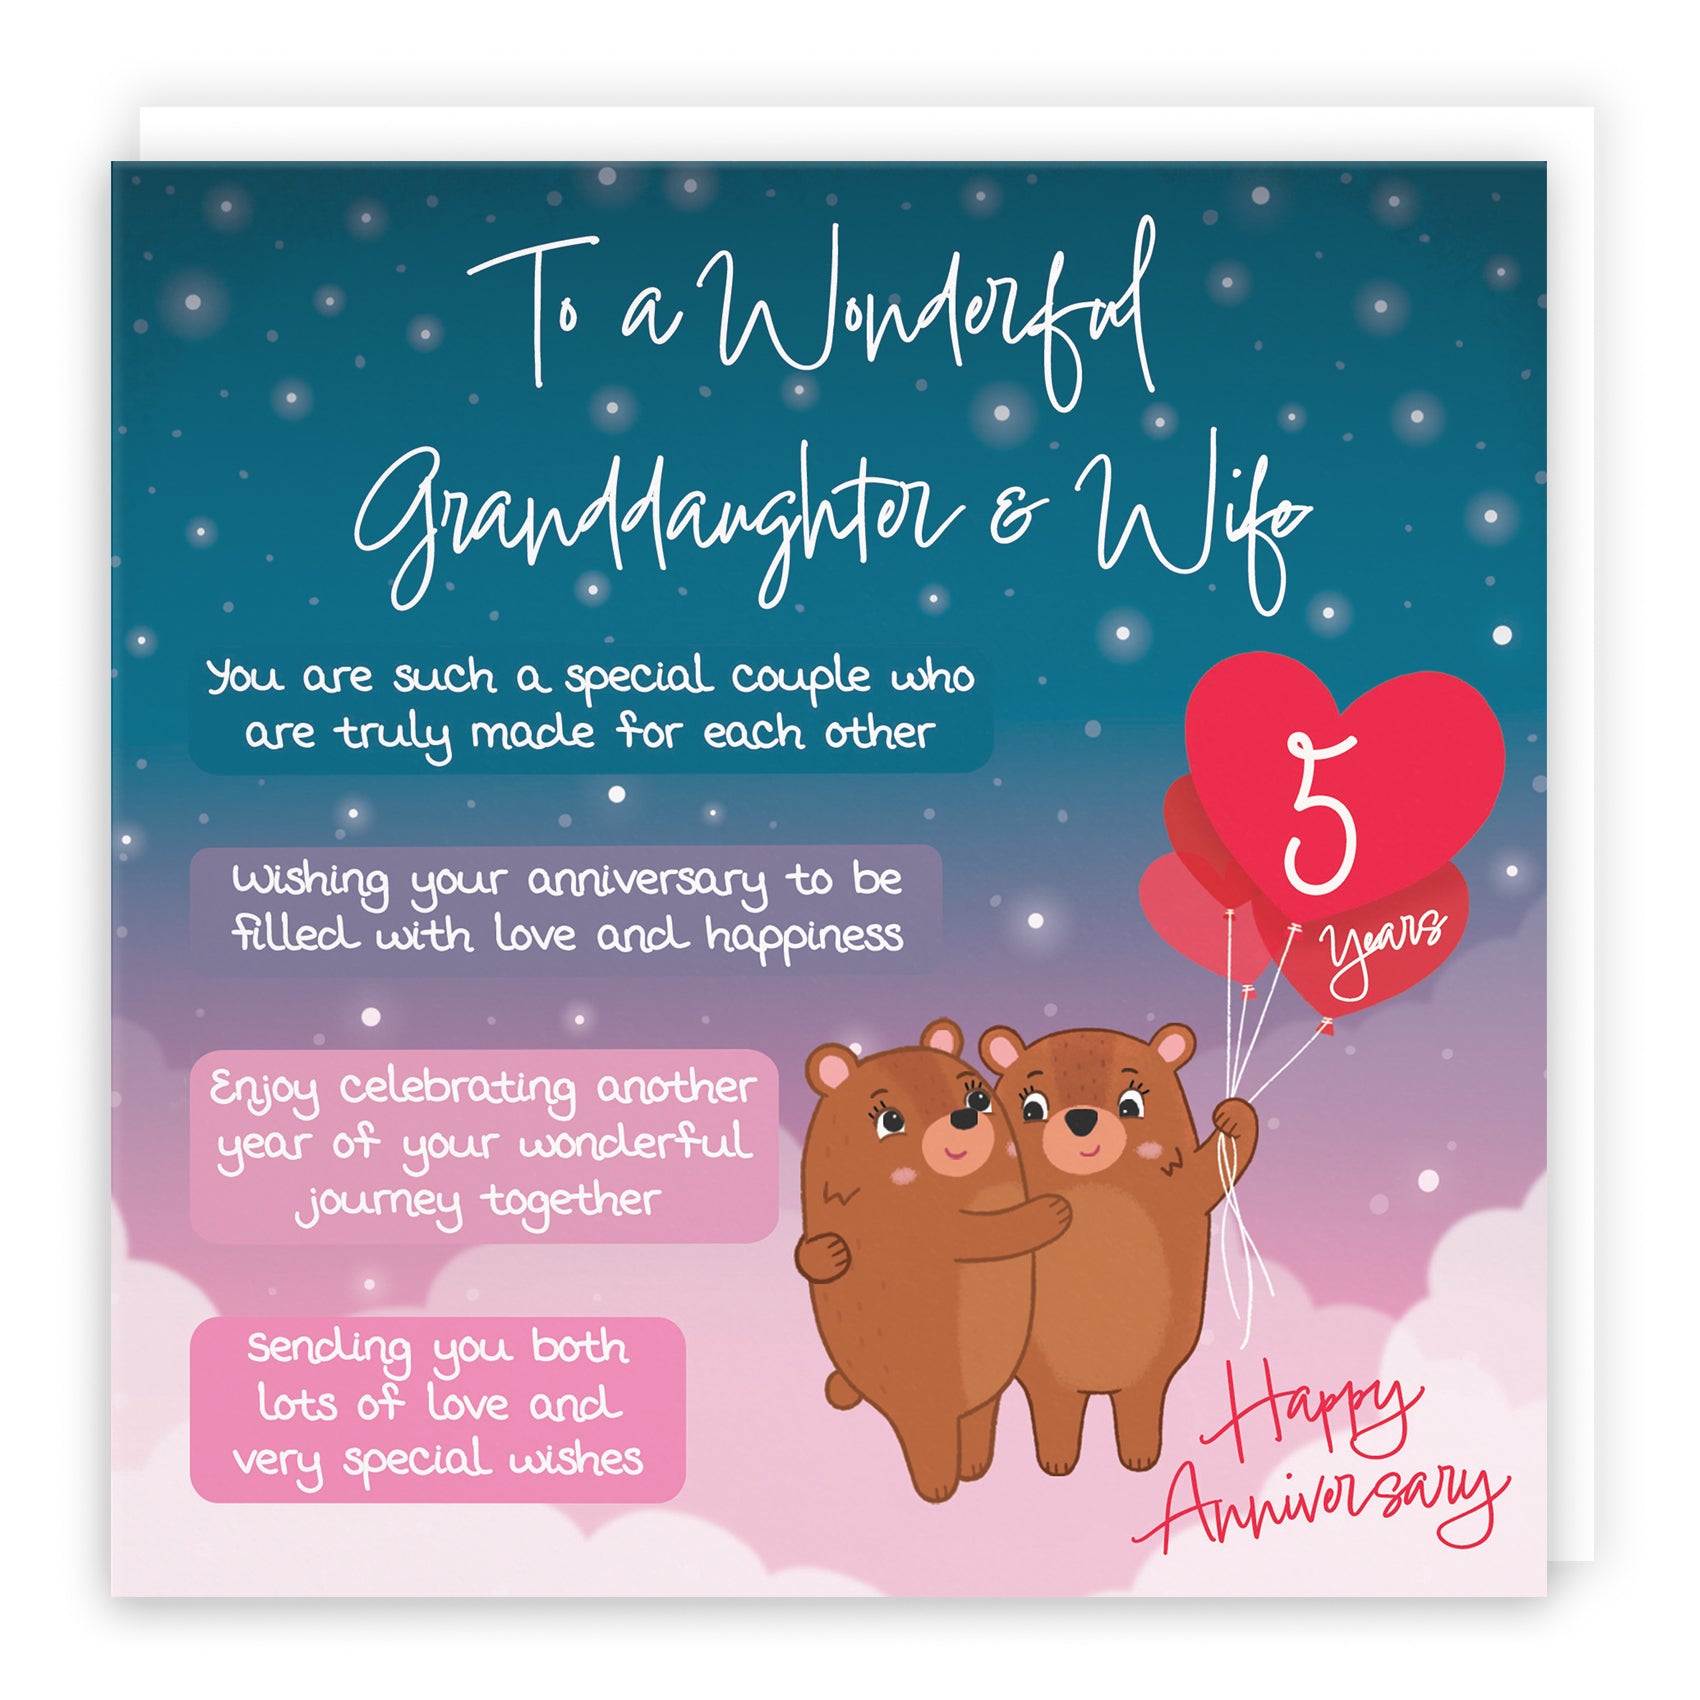 Granddaughter And Wife 5th Anniversary Card Starry Night Cute Bears